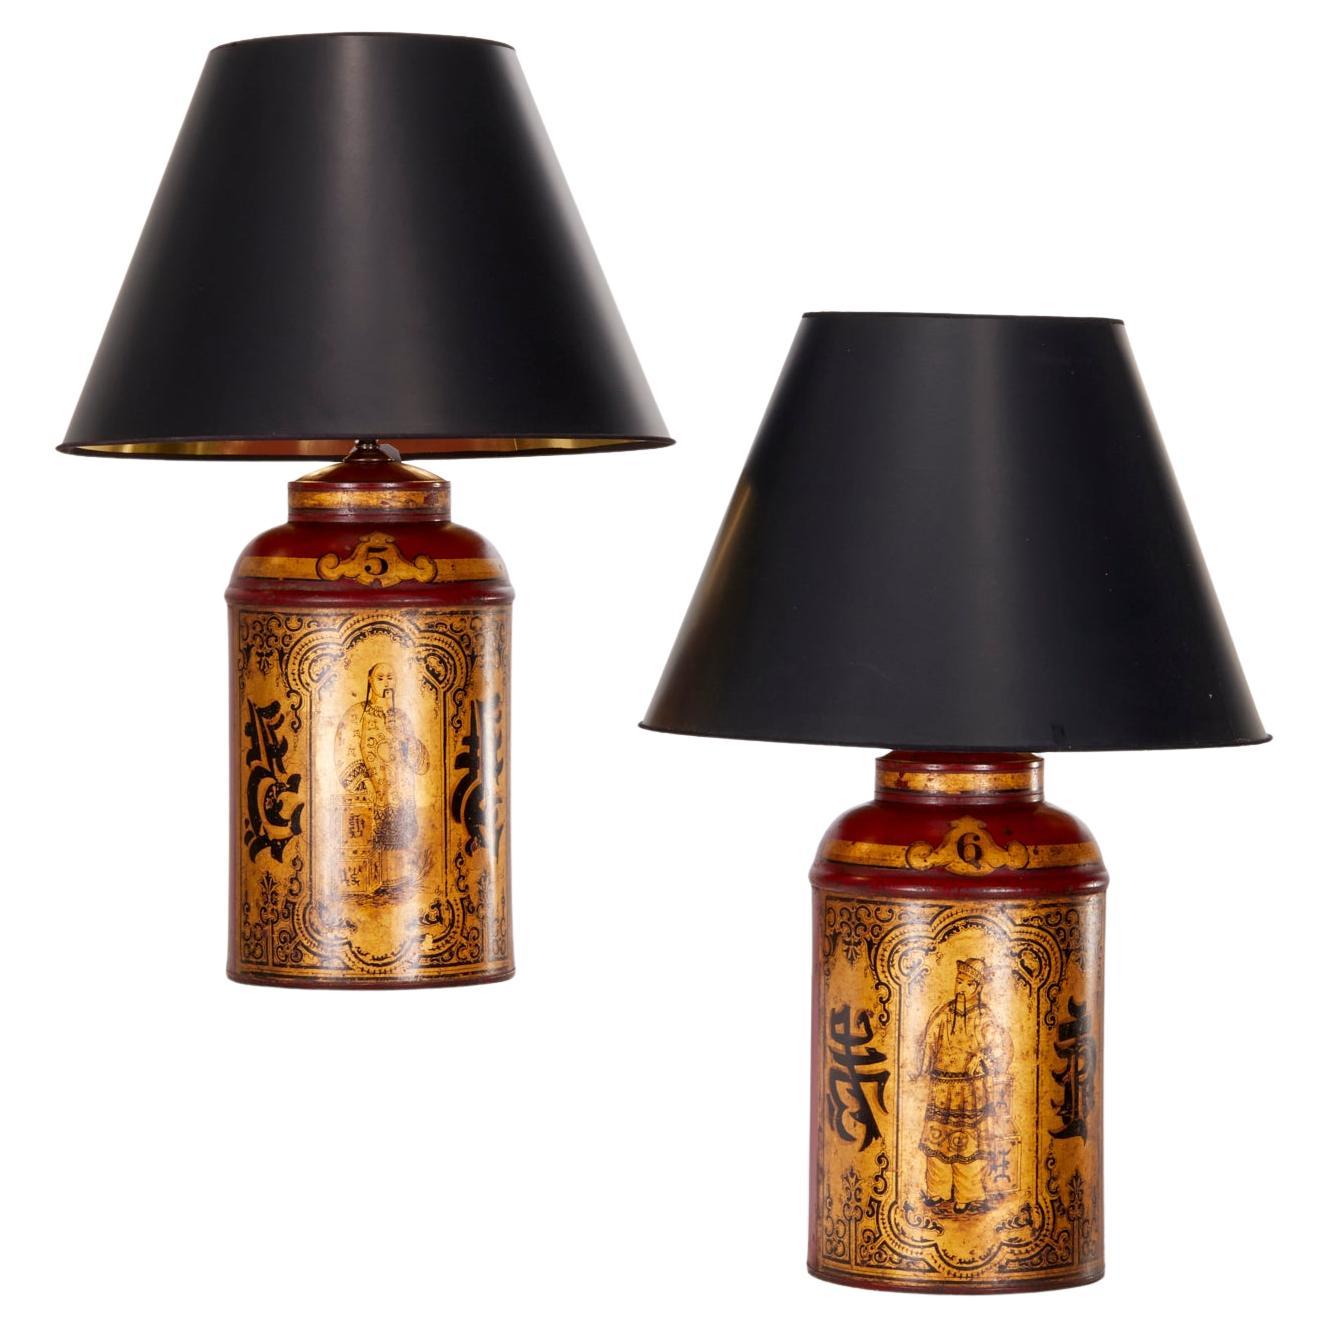 Victorian Red and Gold Tole Tea Canister Lamps with Black Card Shades - A Pair